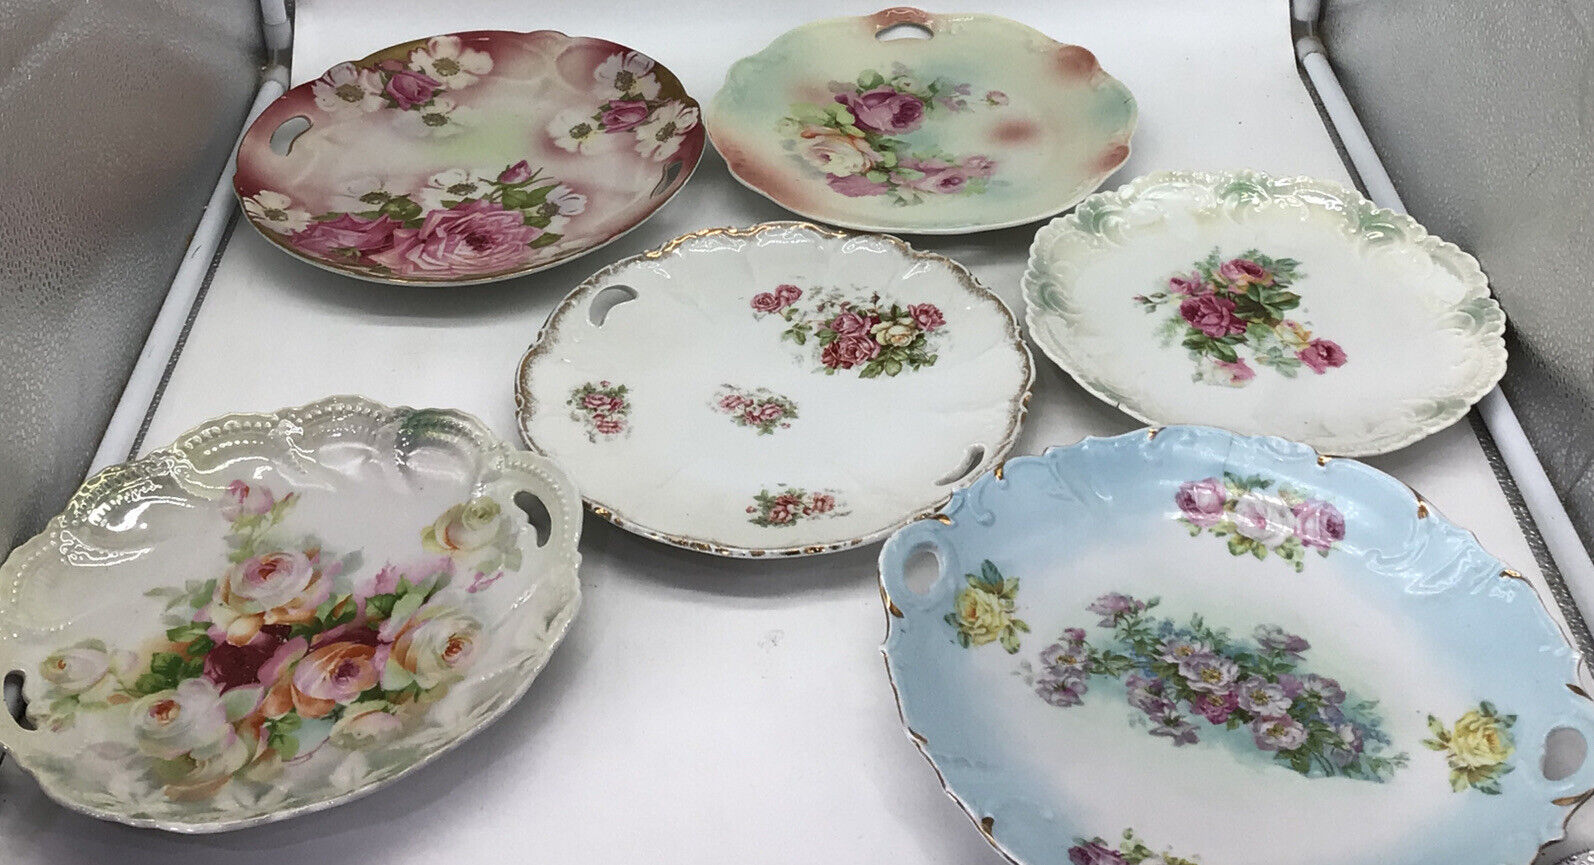 6 Hand-painted Plates Bavaria Germany Three Crowns Antique Roses 1 Has Crack